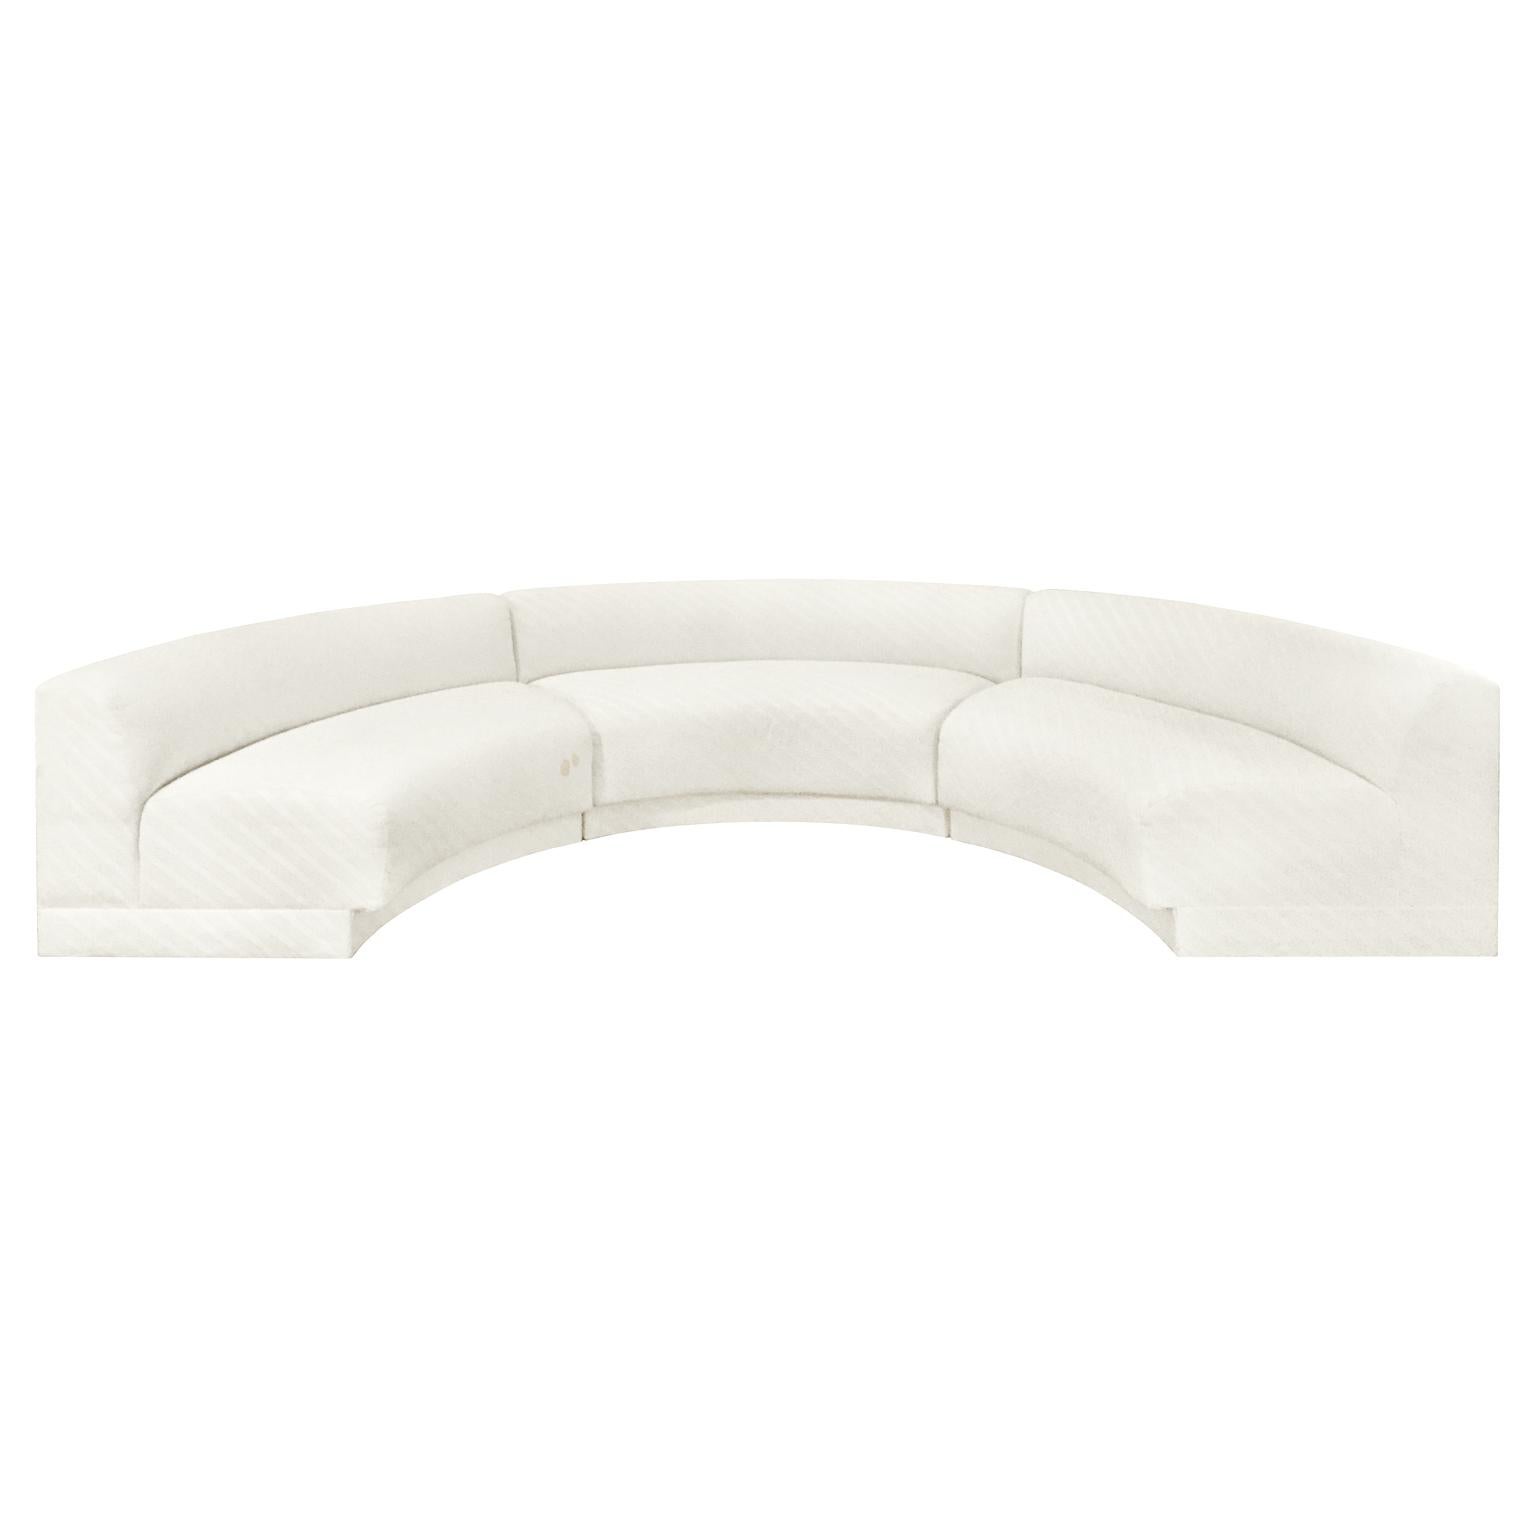 1970s Three-Piece Curved Sectional Sofa in Original Ivory Upholstery